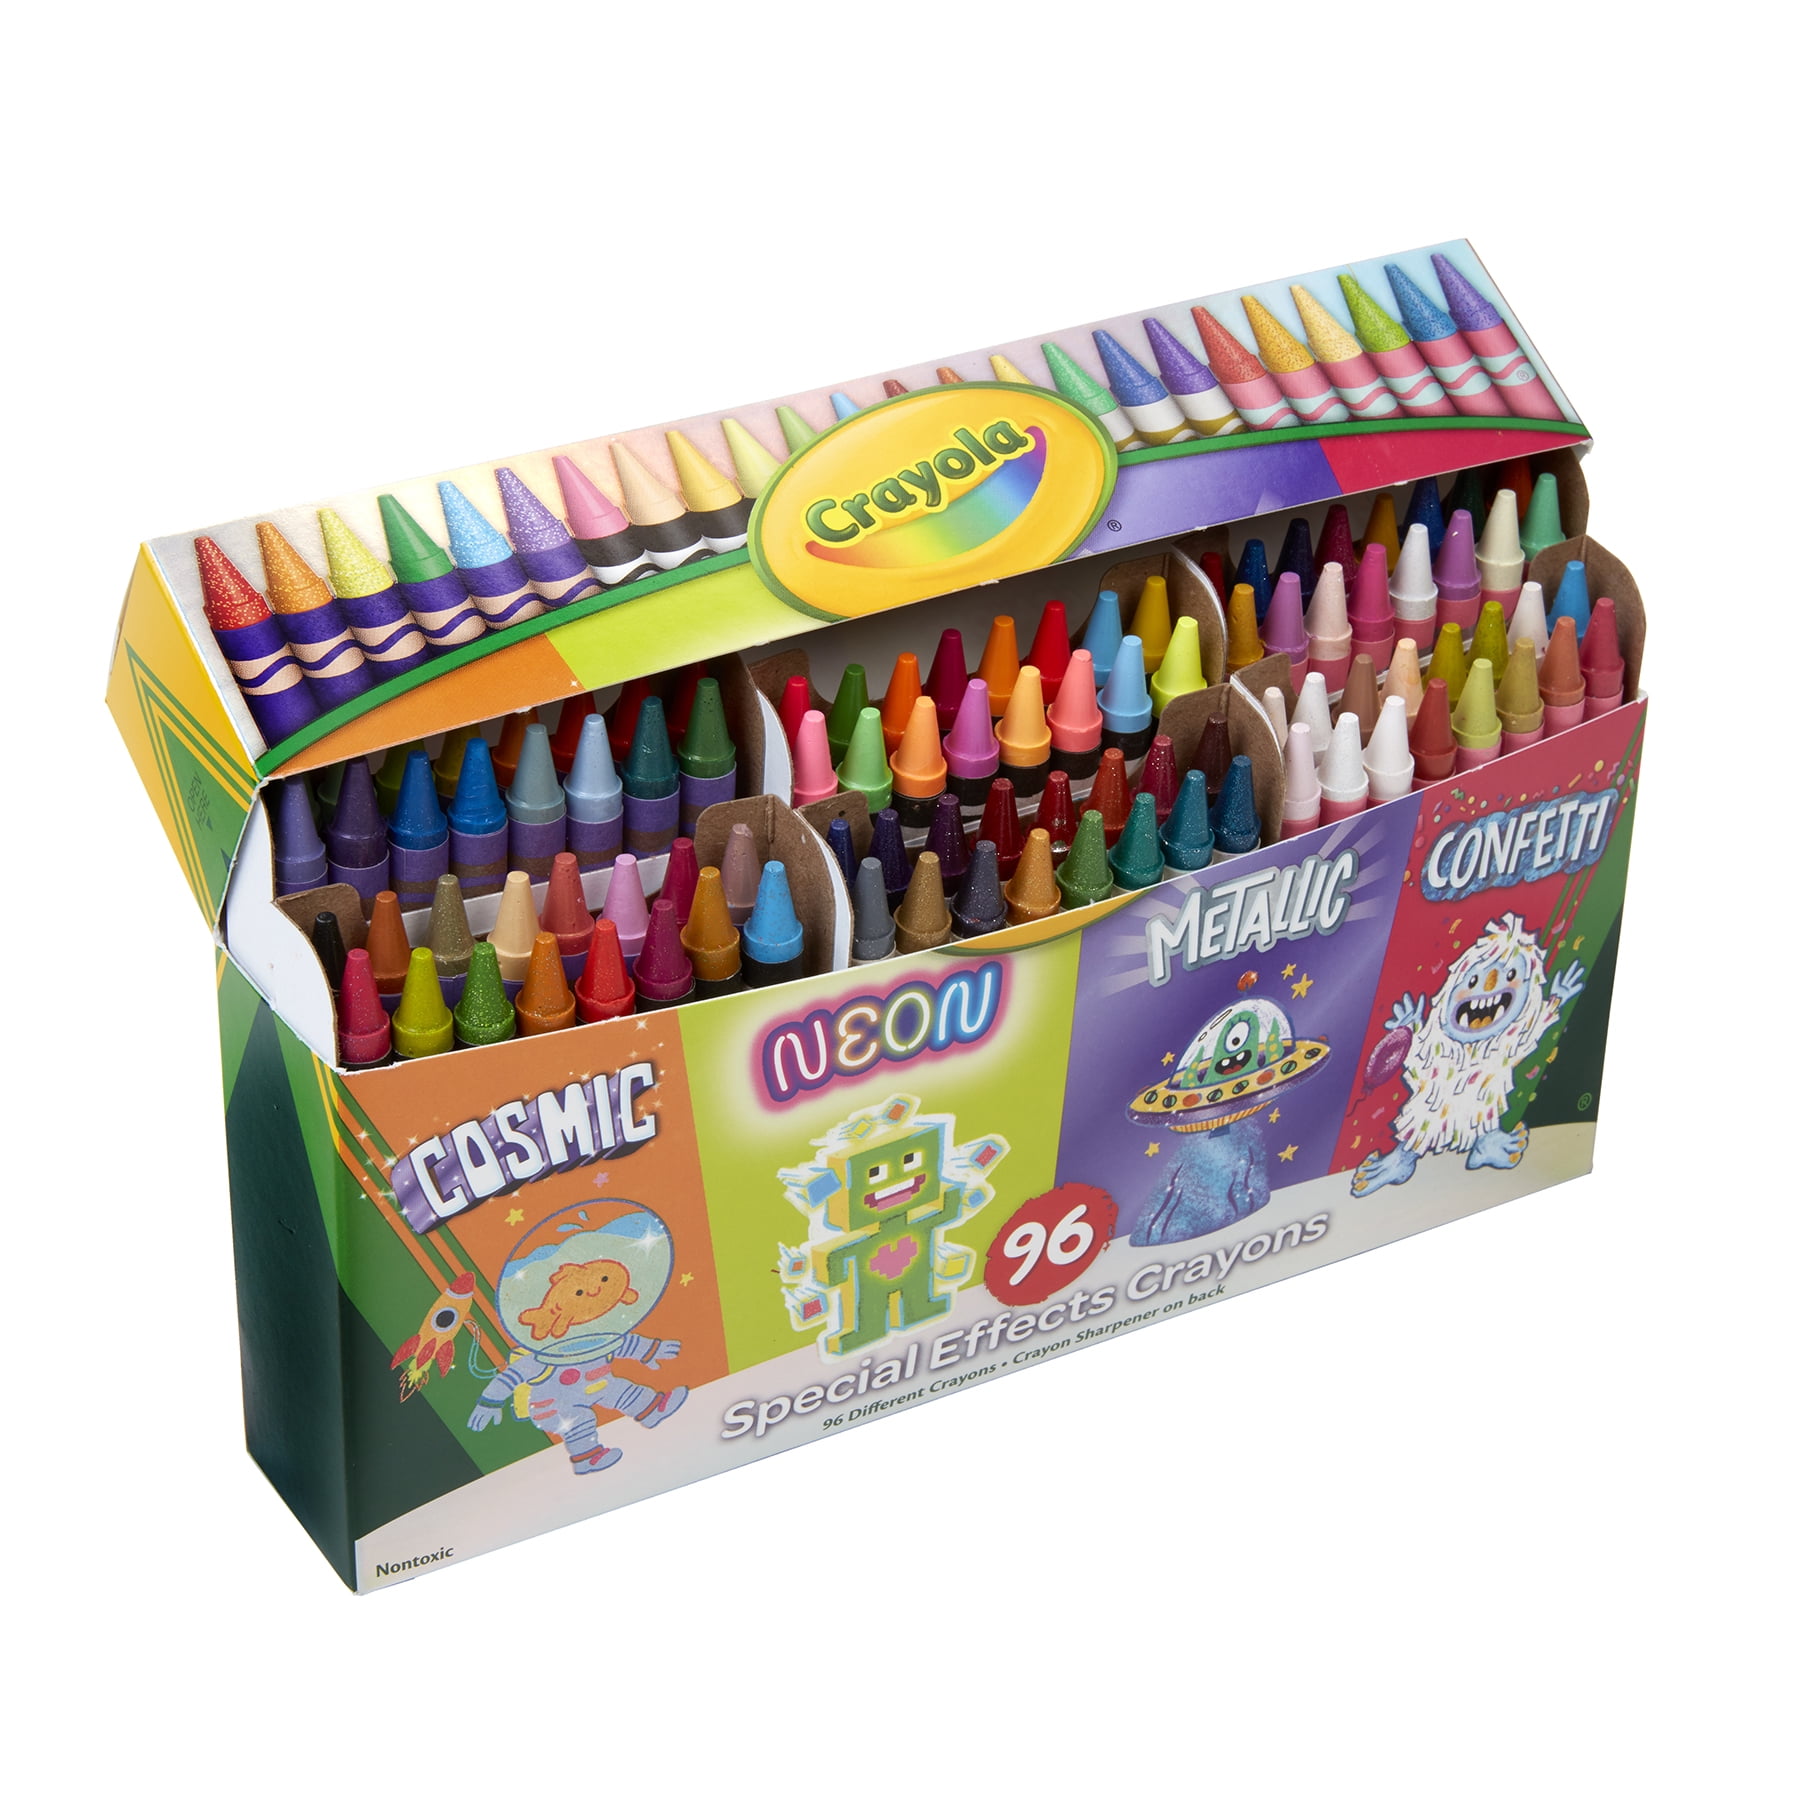 REVIEW] Crayola Special Effects Crayons, 120-count 